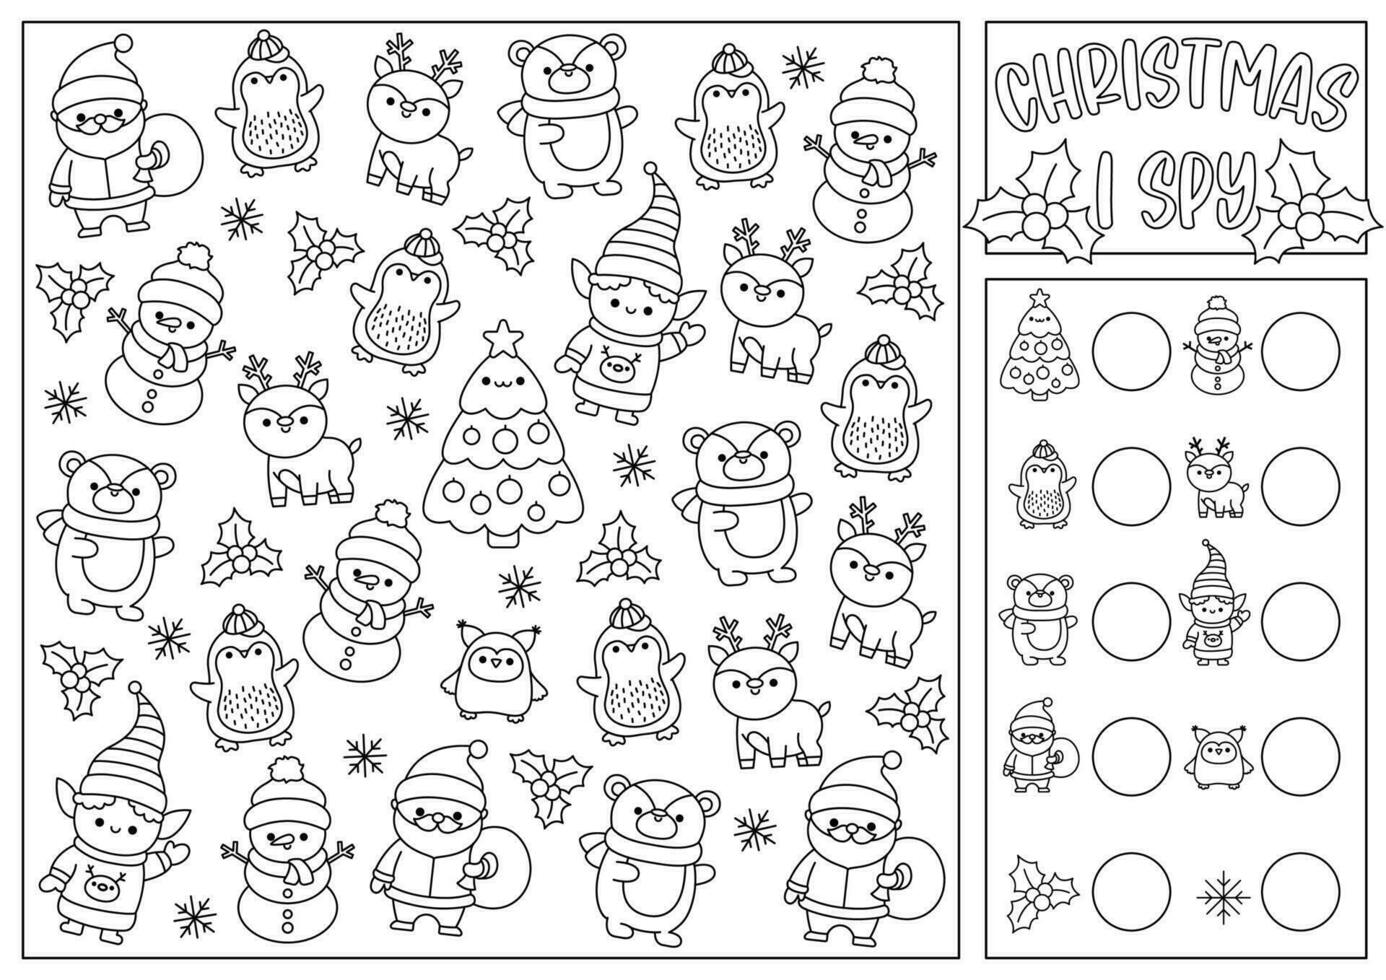 Christmas black and white I spy game for kids. Searching and counting activity with cute kawaii holiday symbols. Winter printable worksheet, coloring page. New Year spotting puzzle with fir tree vector